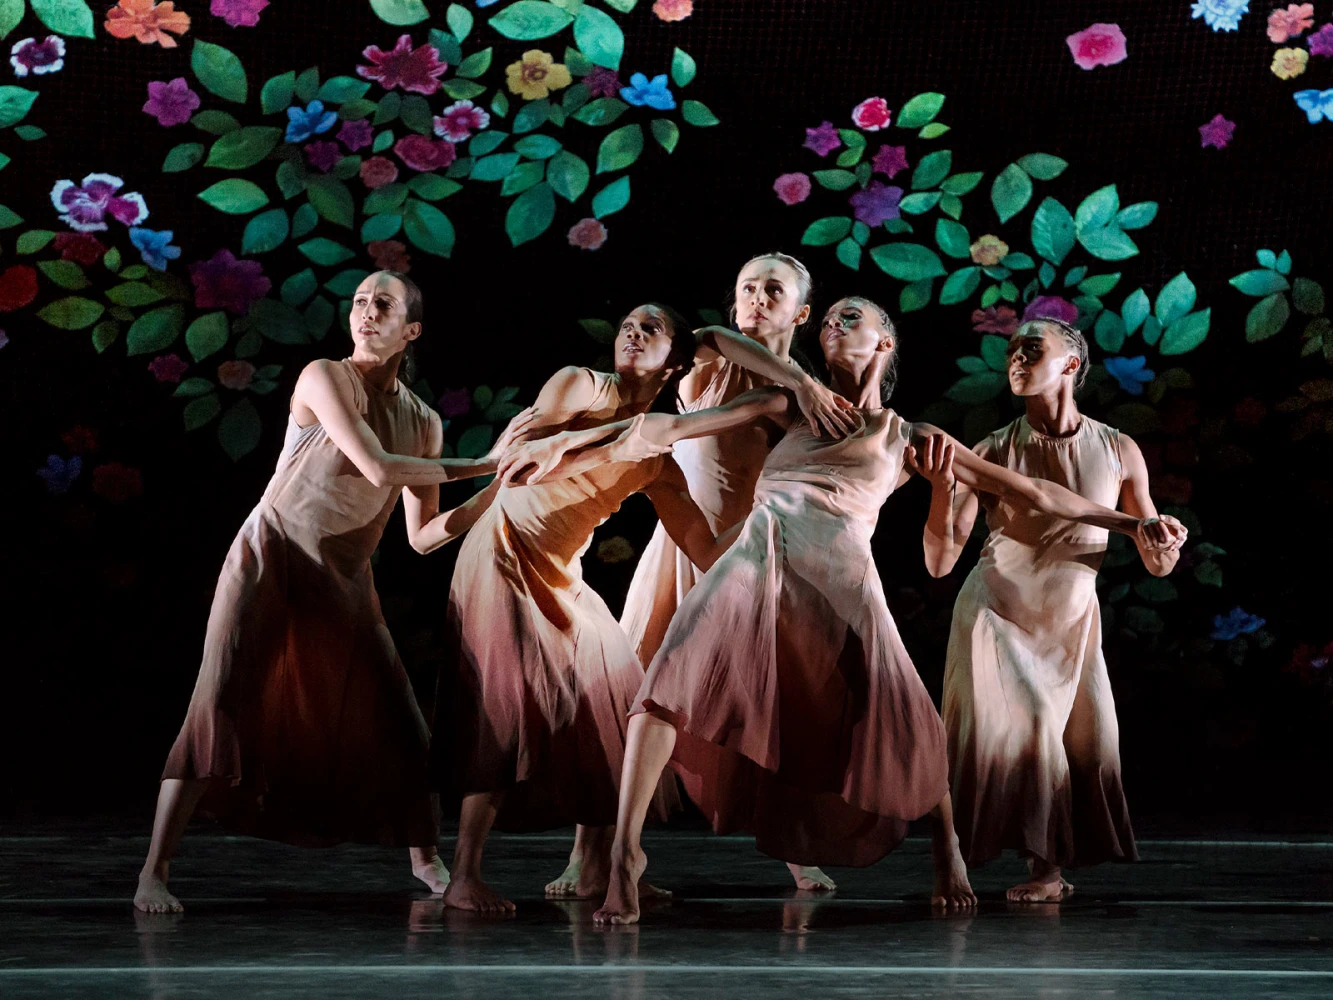 Alvin Ailey American Dance Theater: What to expect - 4